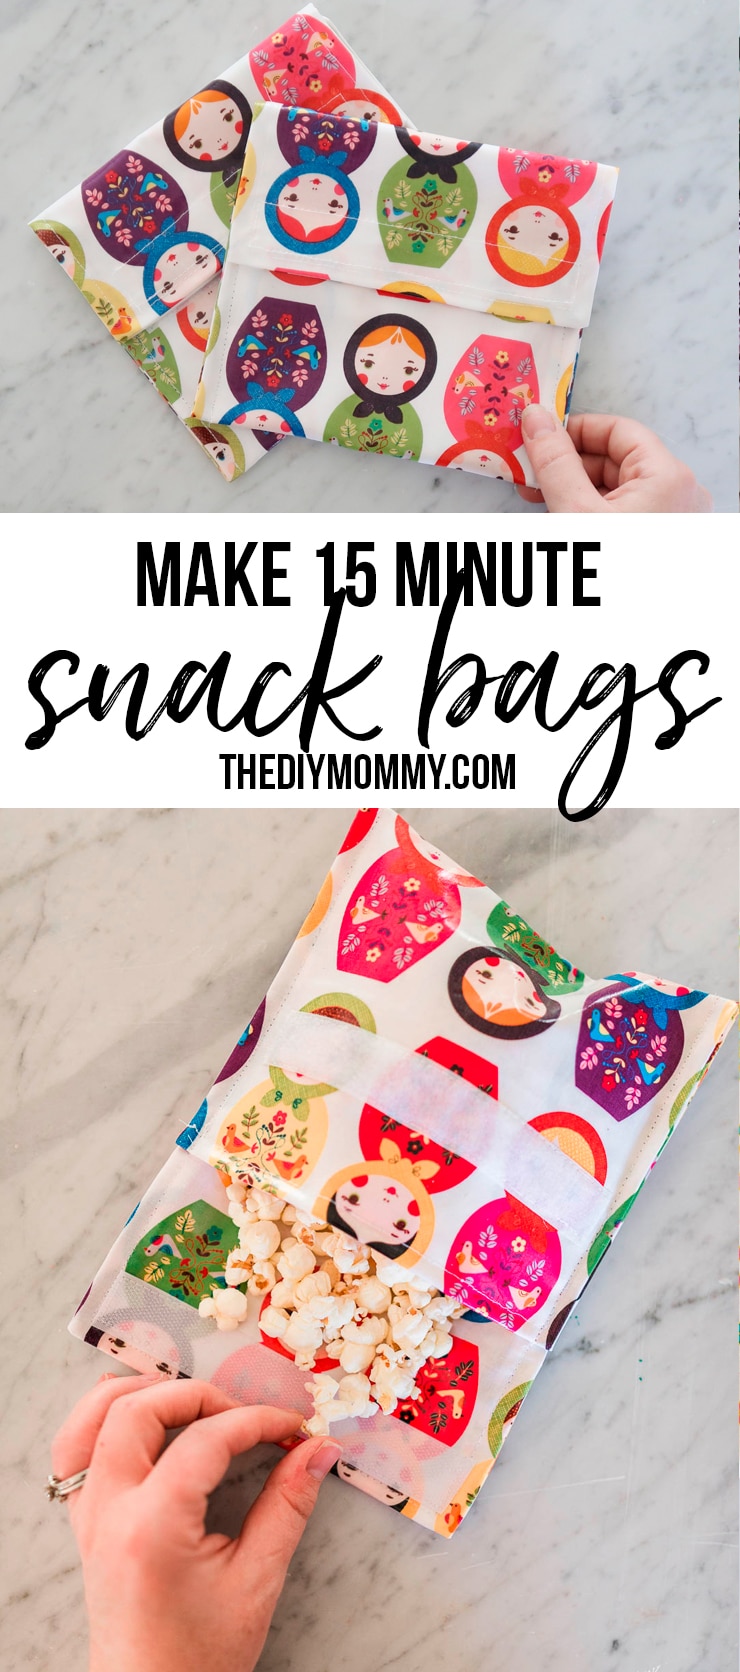 How to sew reusable fabric snack bags in 15 minutes. It's so easy!